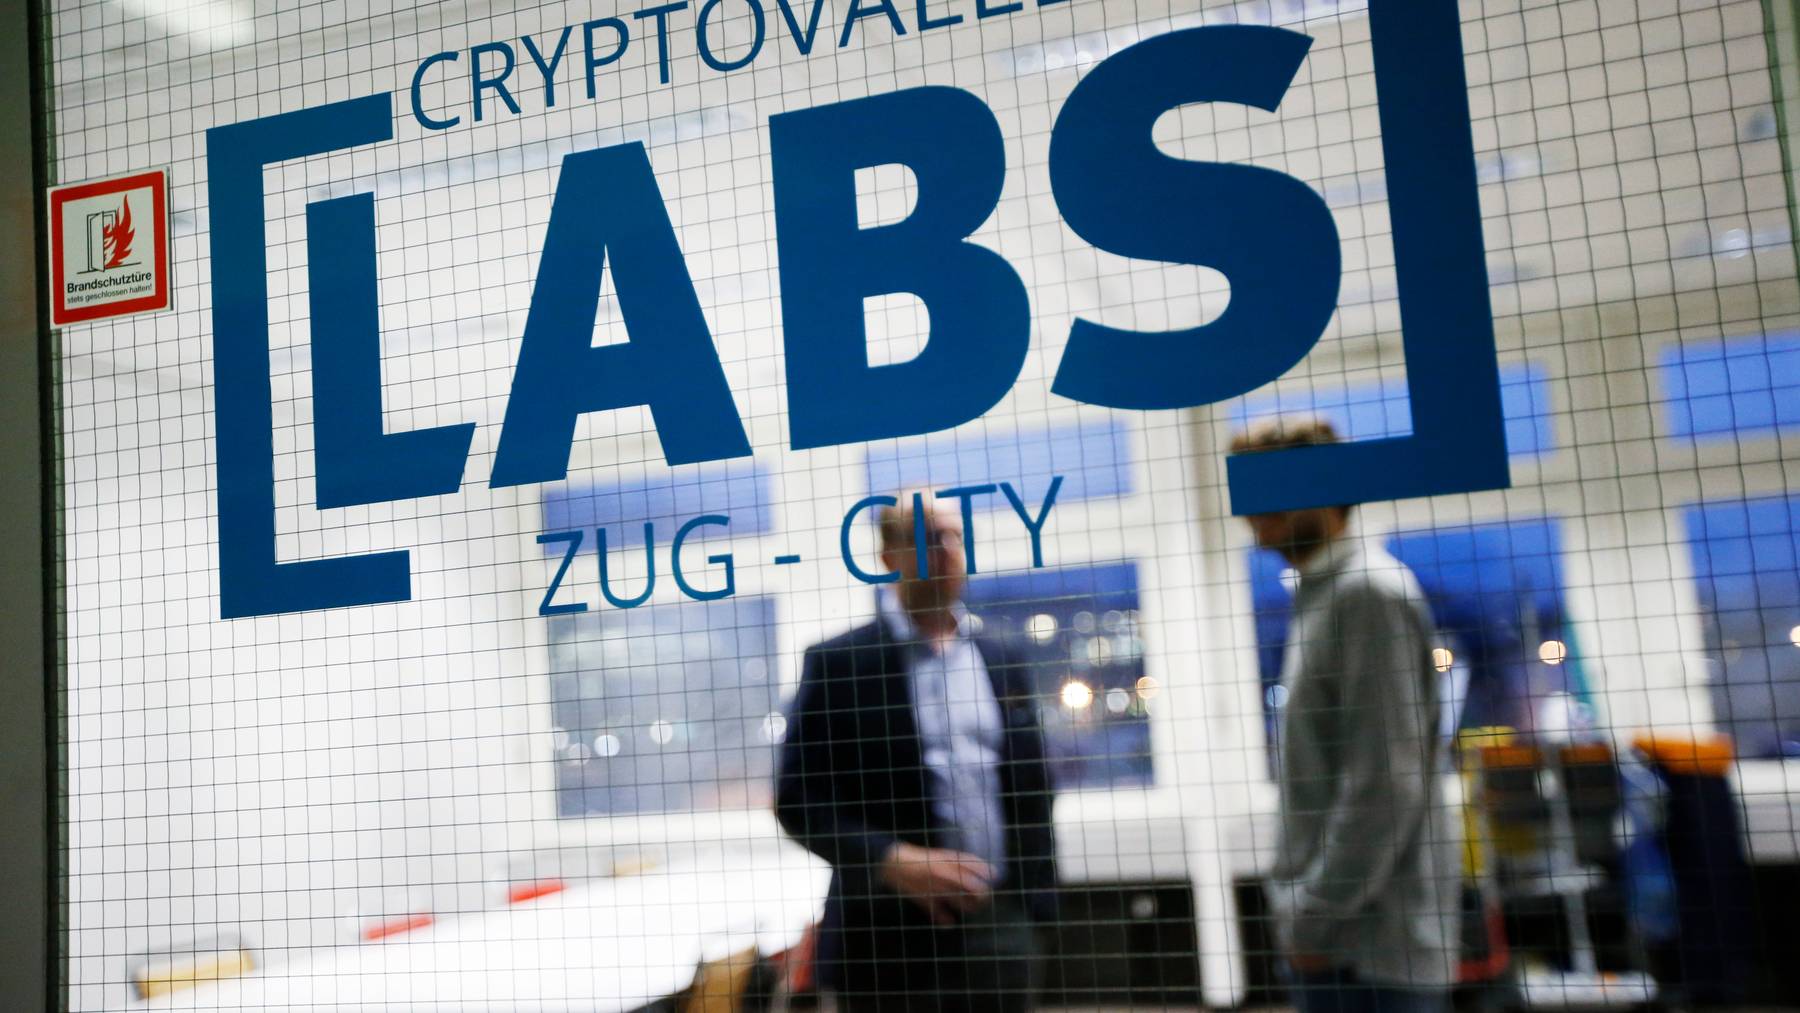 Die Crypto Valley Labs in Zug.